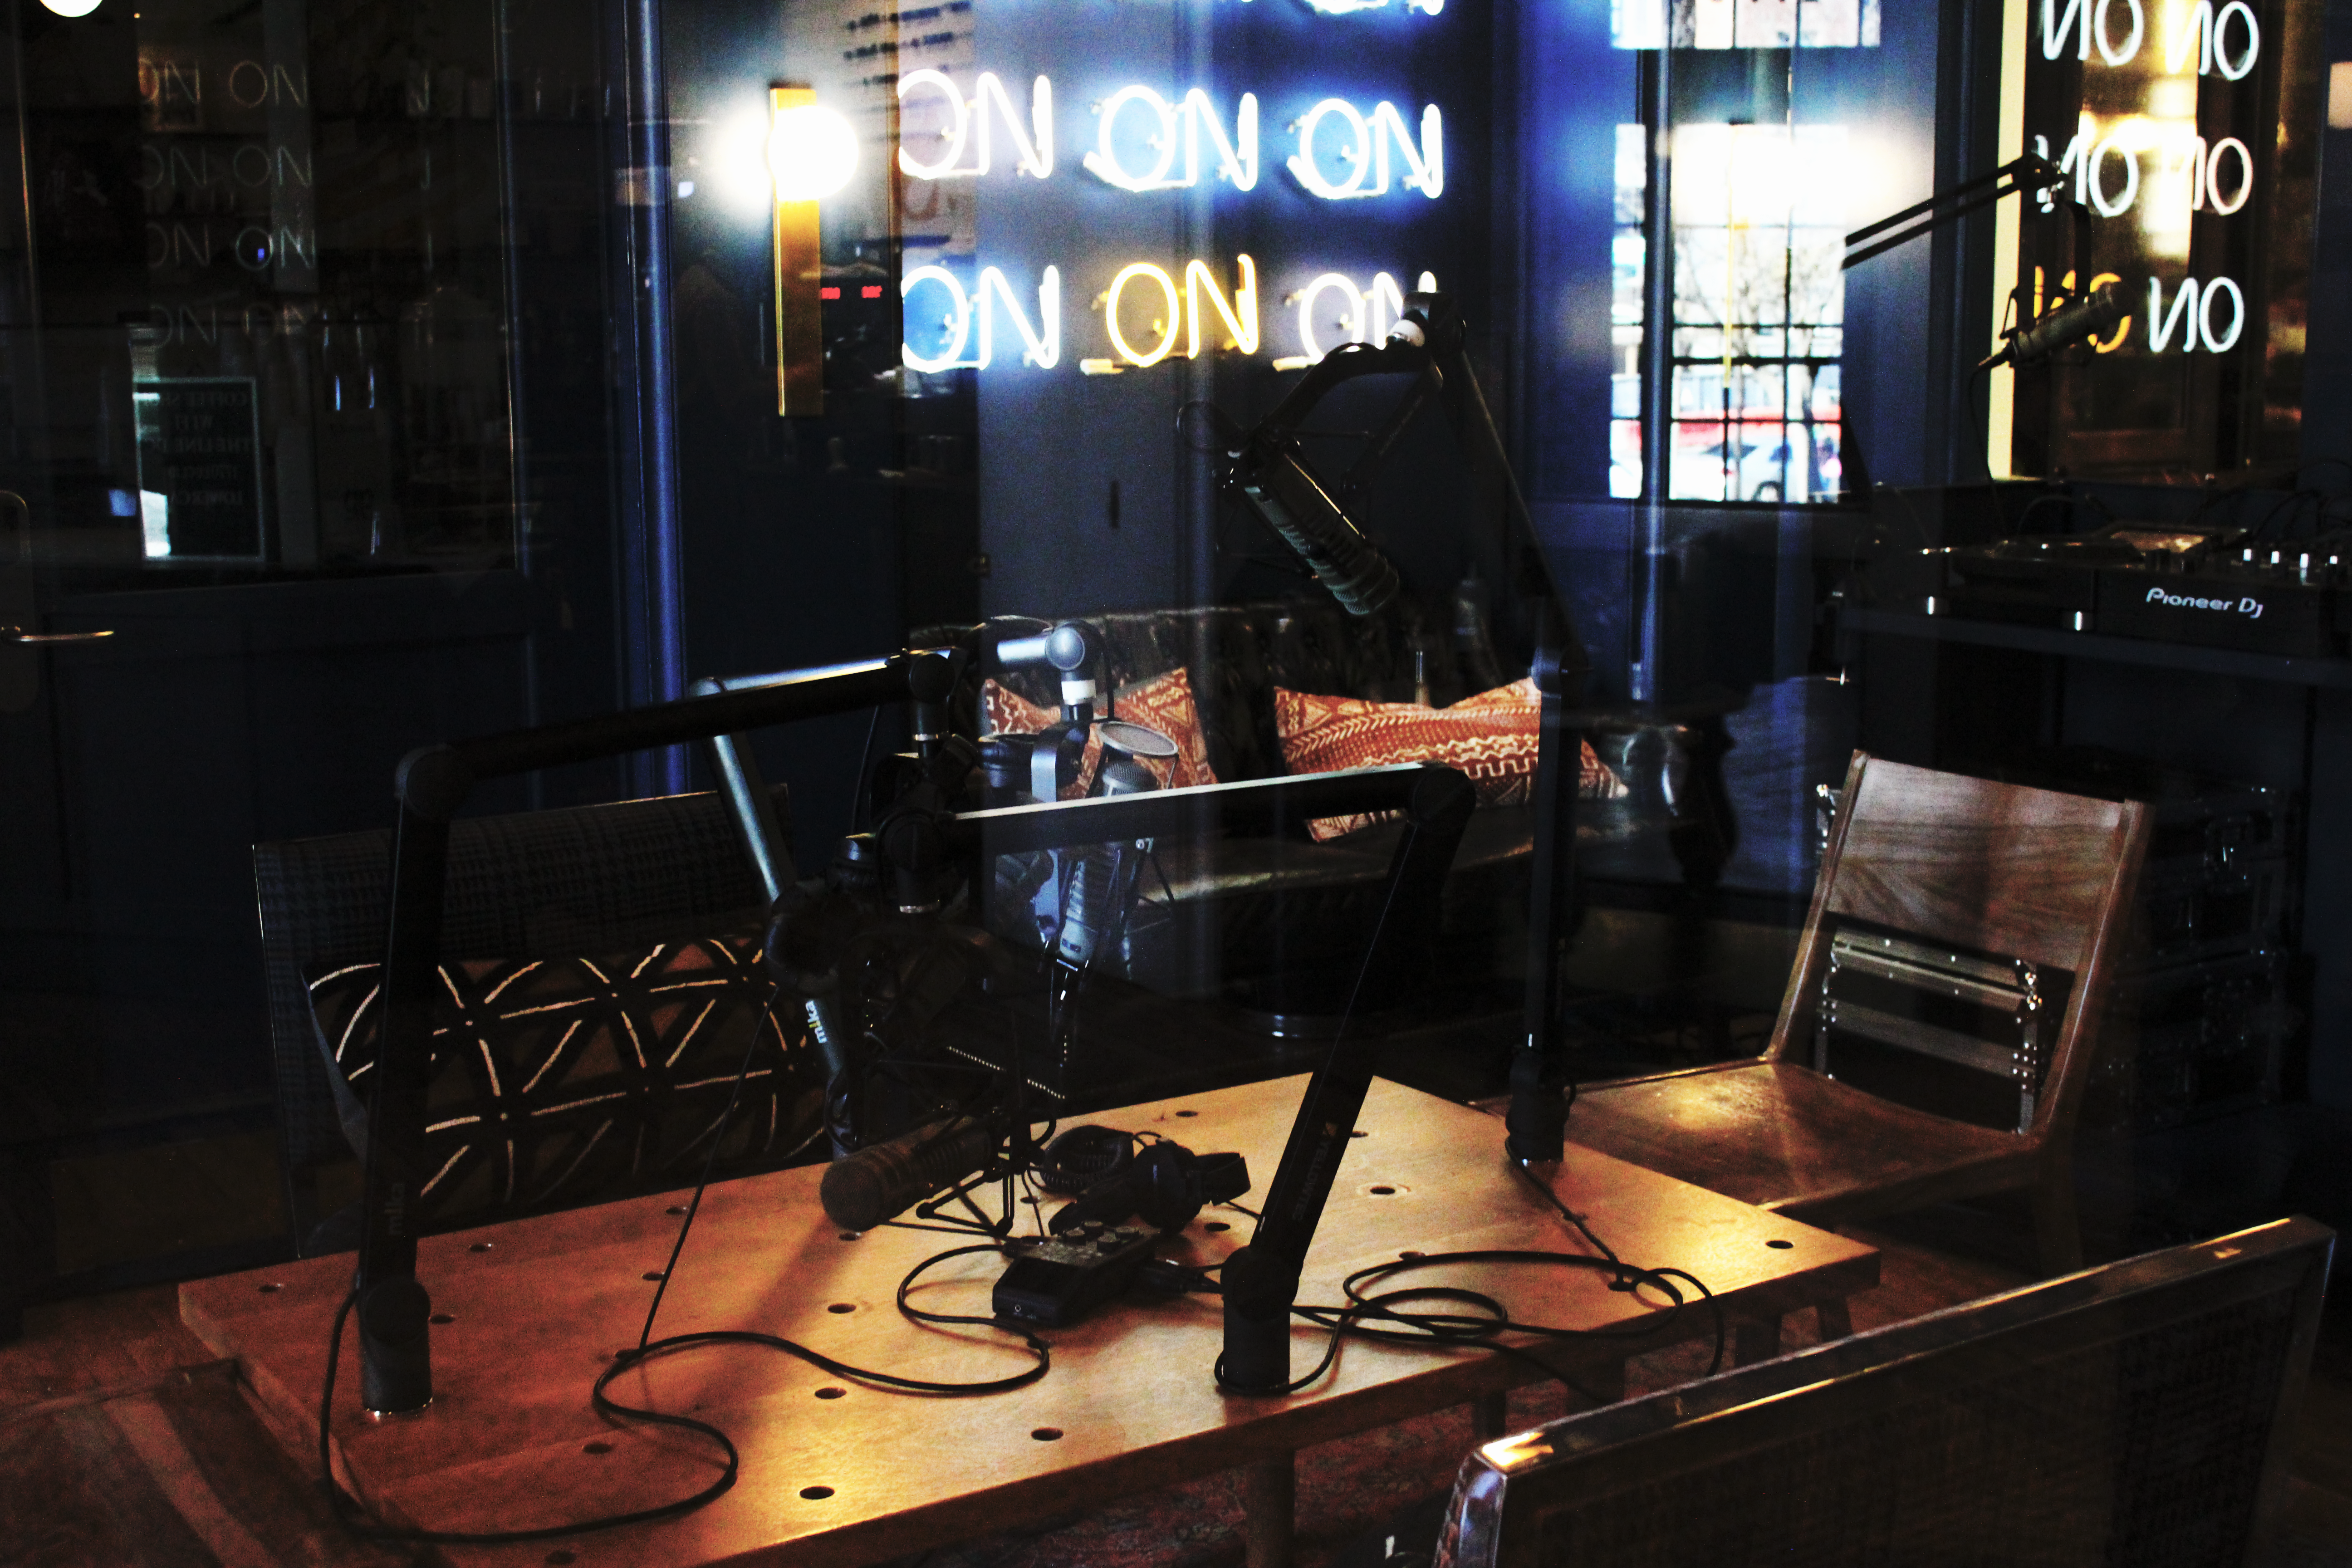 Back ON ON ON: AdMo’s LINE Hotel Plans to Relaunch Community Radio Station